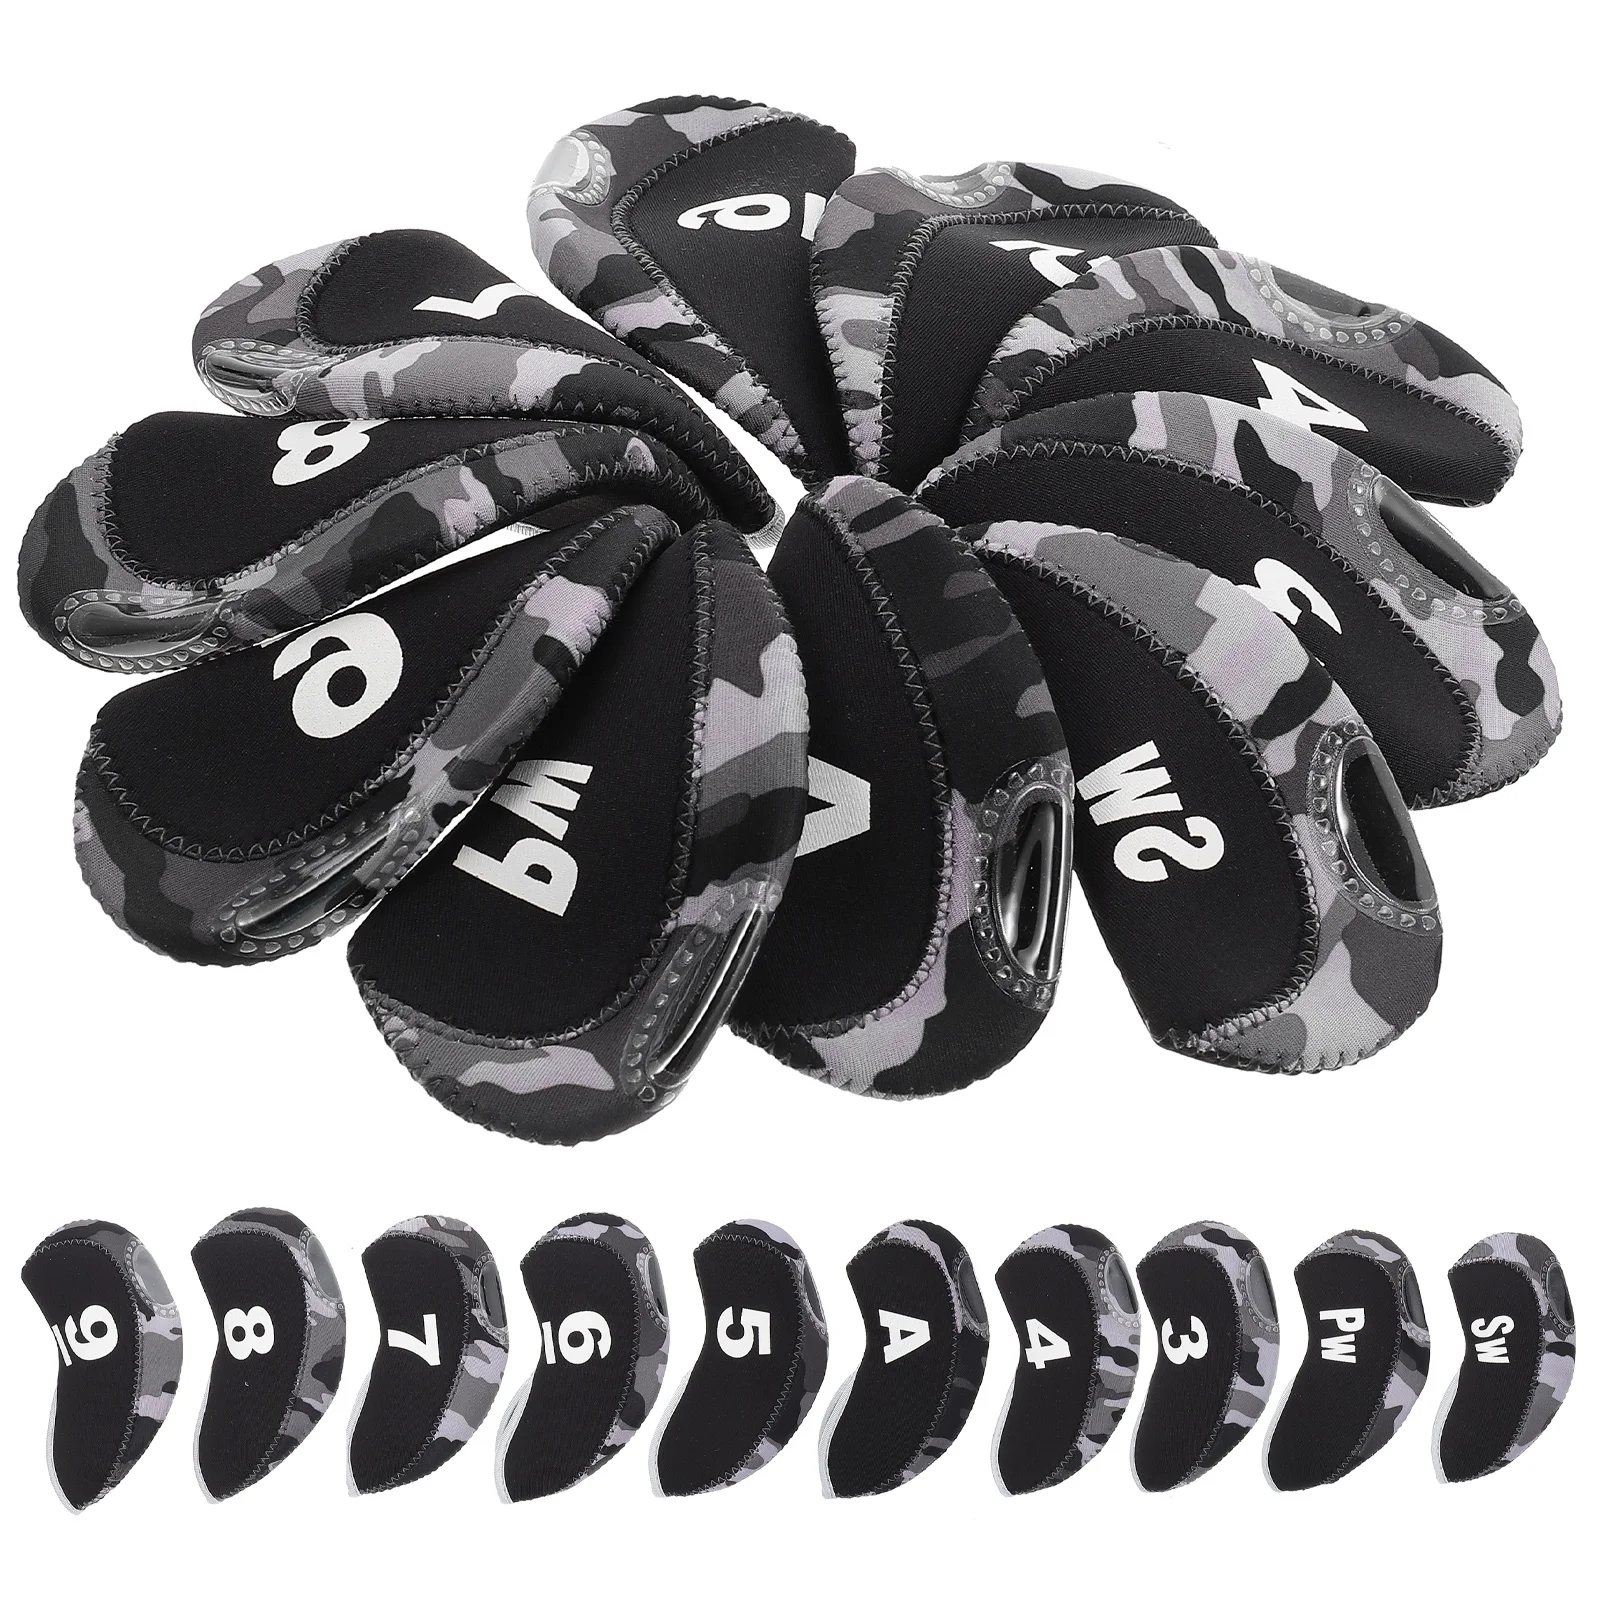 

10 Pcs Head Cover Protector Putter Hardcore Set Neoprene Mallet Headcover Club Golfs Rod Protective Case